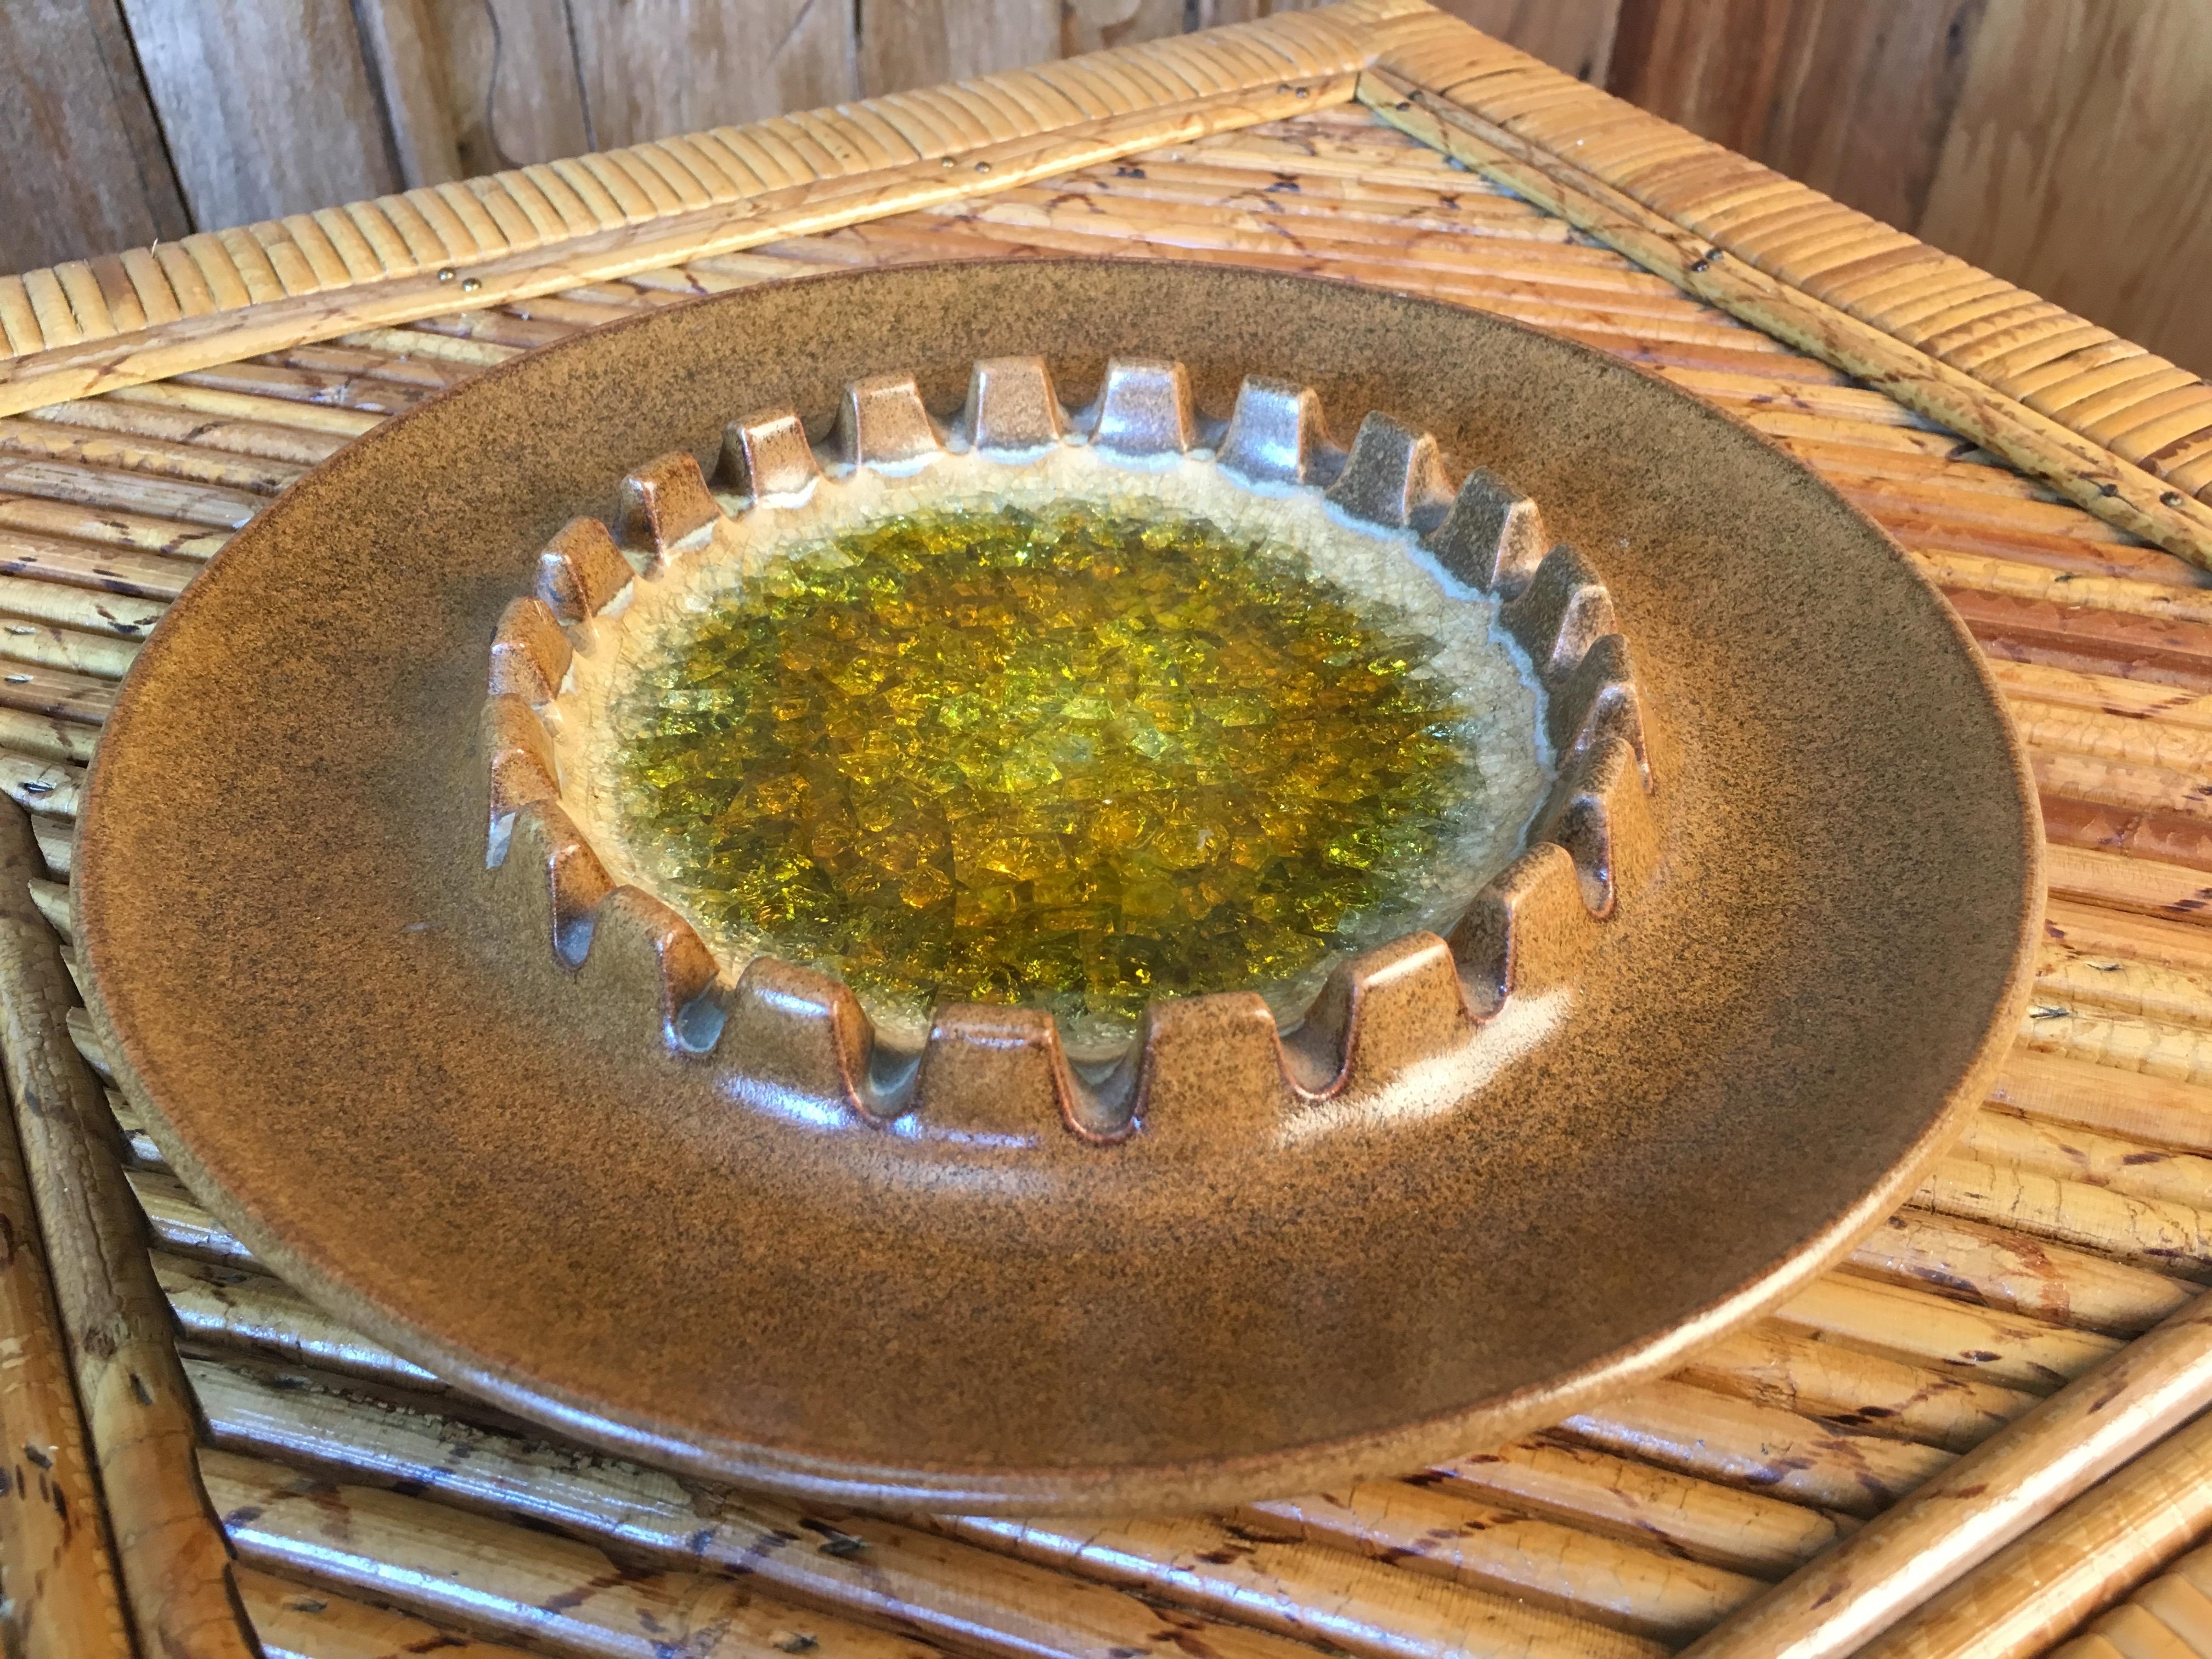 Mid-Century Modern California Studio Pottery Ashtray by Robert Maxwell, 1965 For Sale